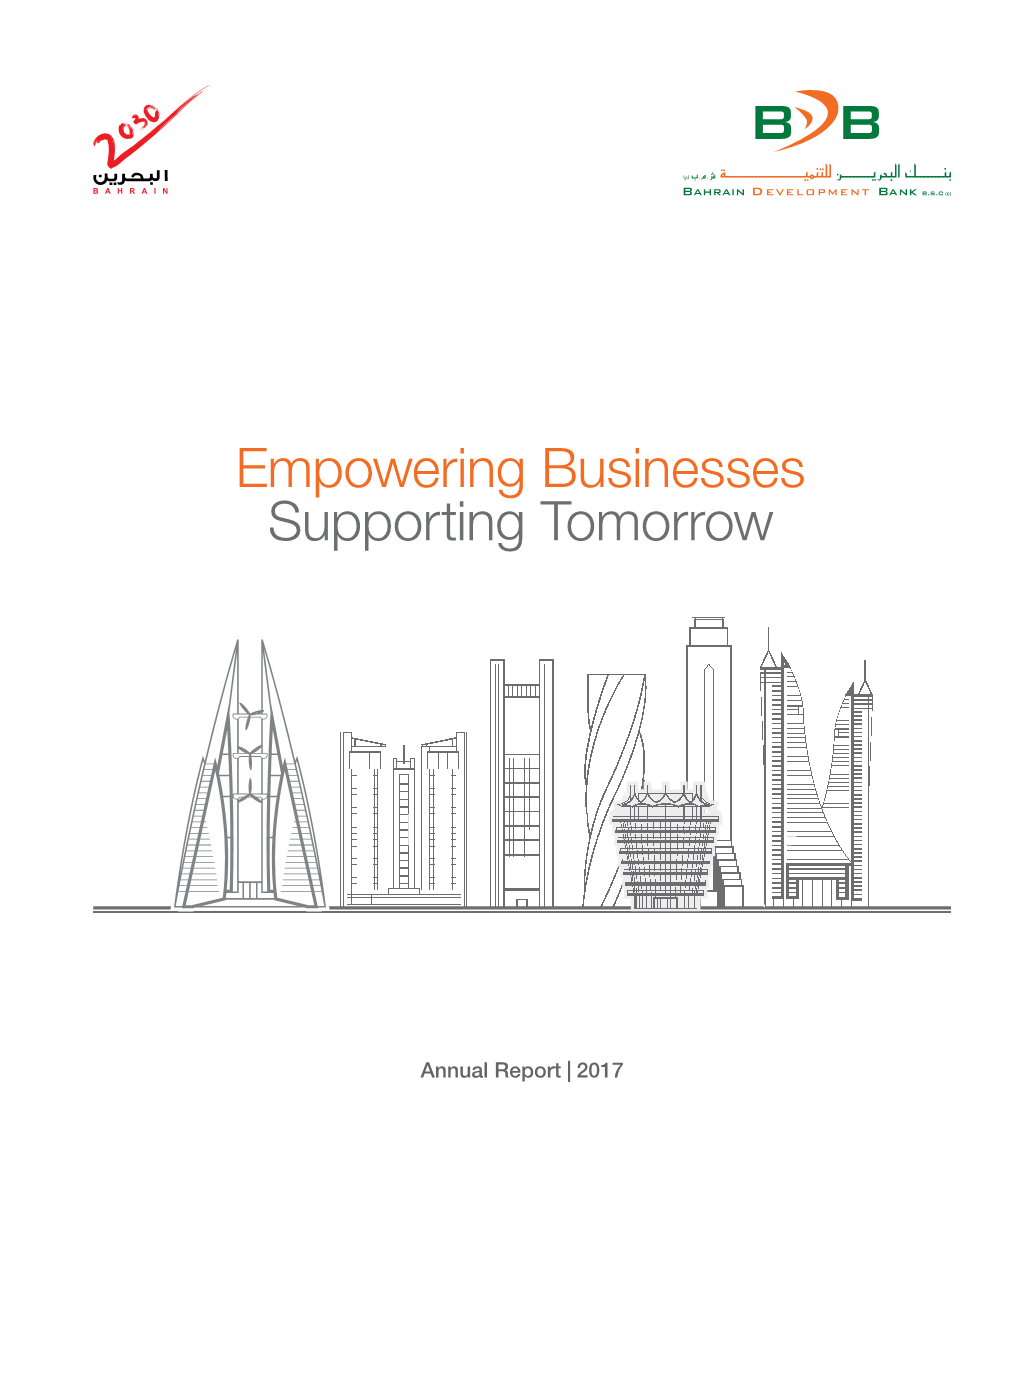 Empowering Businesses Supporting Tomorrow